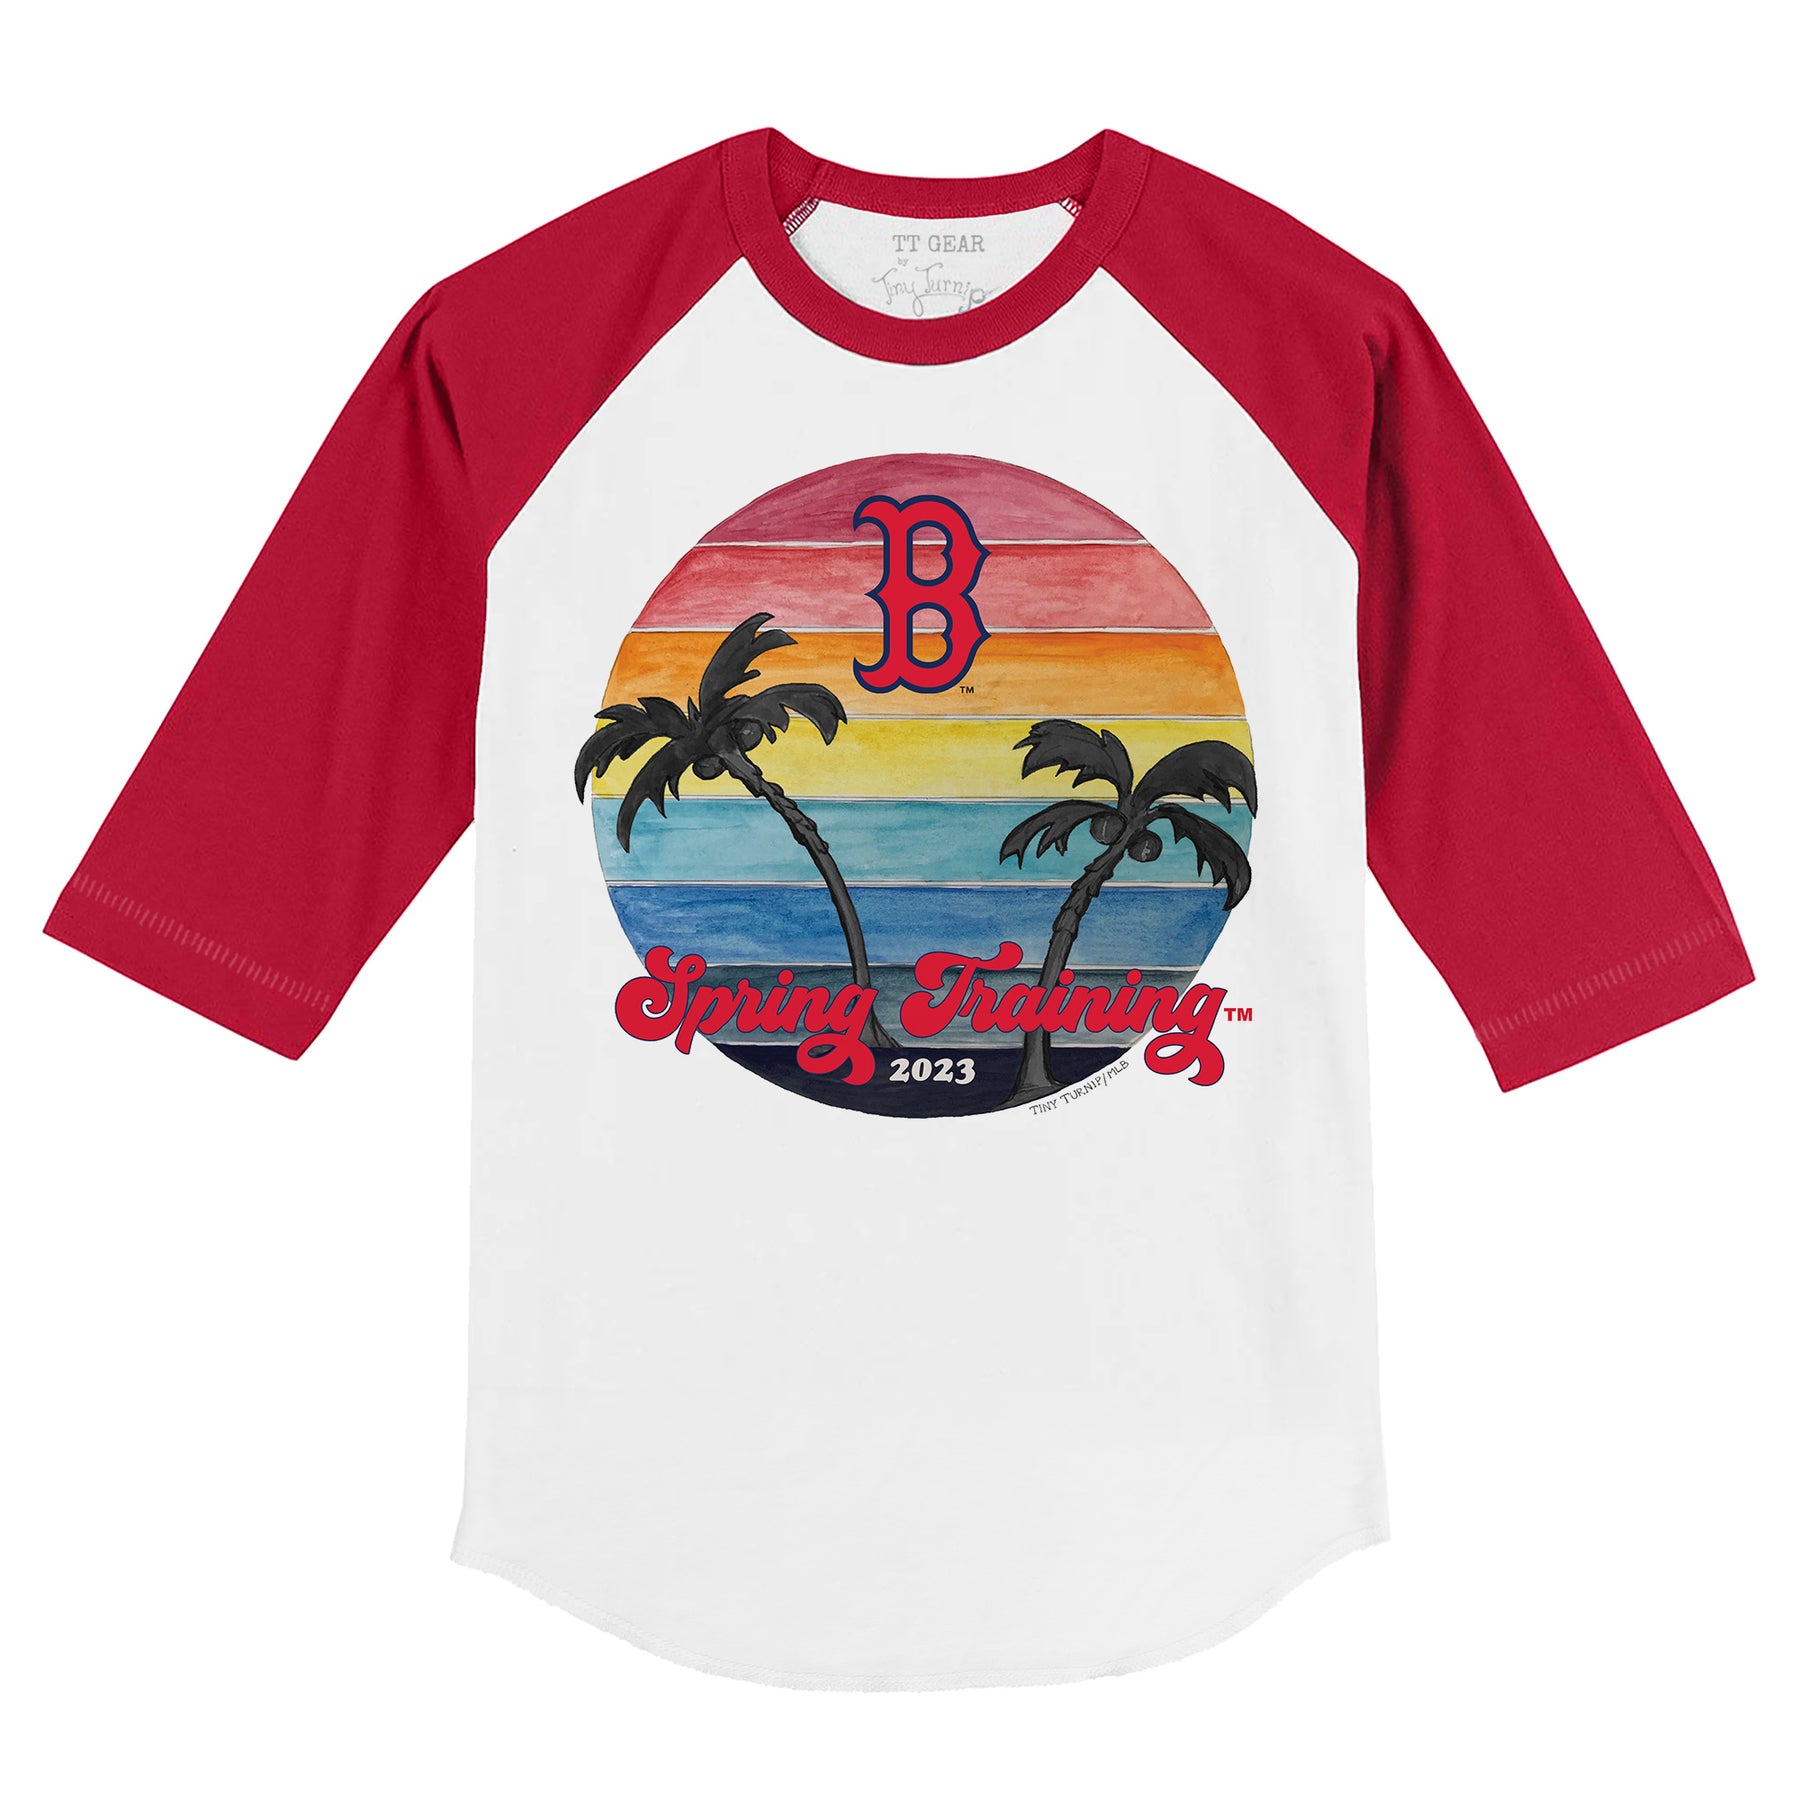 BOSTON RED SOX for Women V-Neck Red Tee MLB FREE SHIPPING IN USA